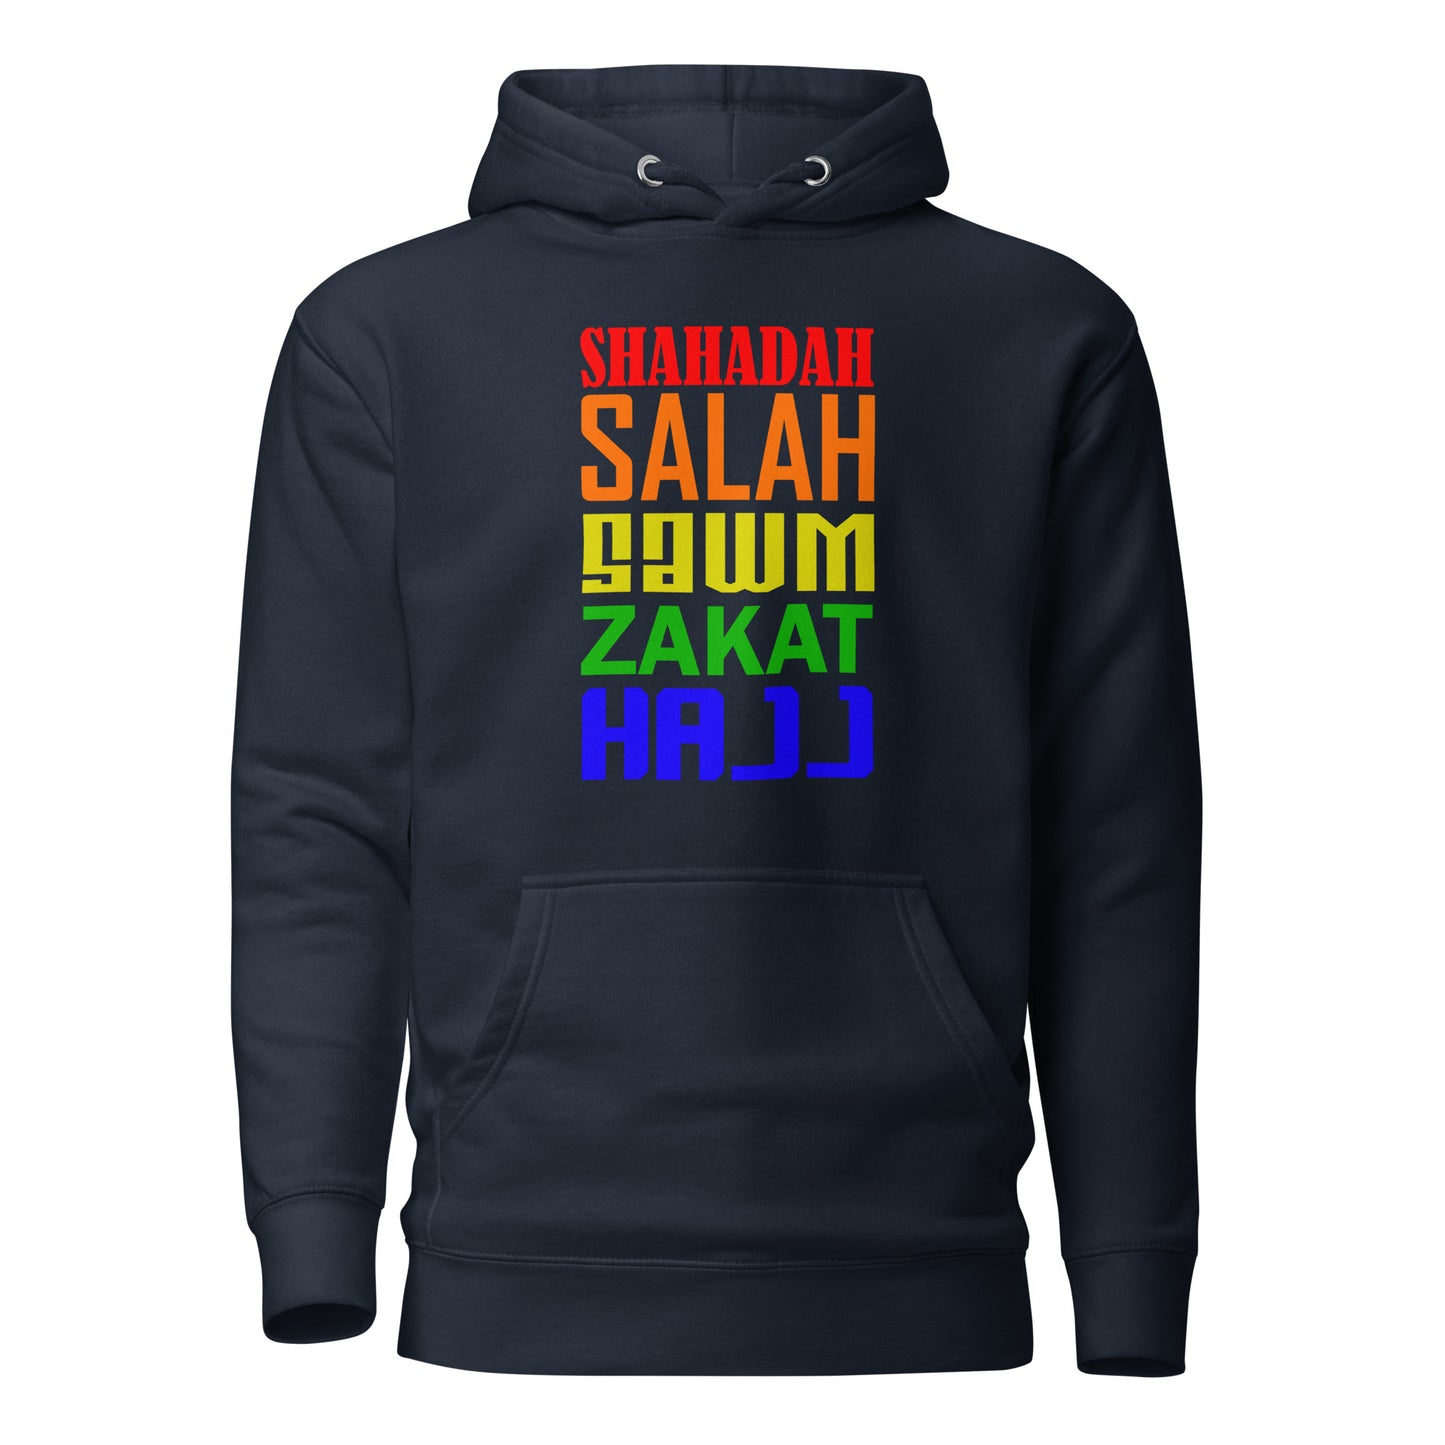 A navy-coloured unisex hoodie with the text mentioning the five pillars of Islam - Shahadah, Salah, Sawm, Zakat, and Hajj - in five different colours: red, orange, yellow, green, and blue.